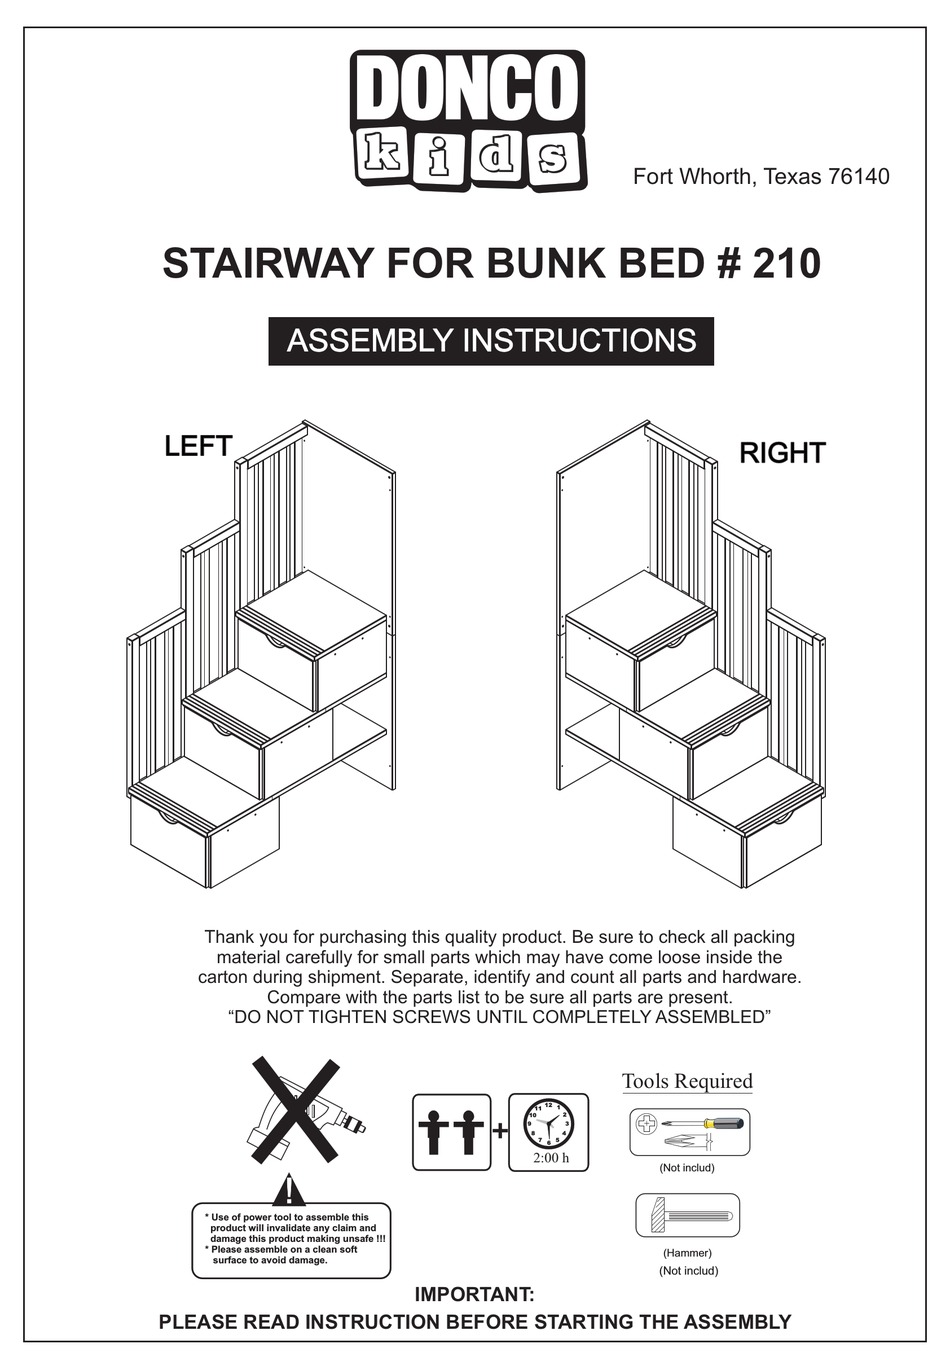 Donco Kids Stairway For Bunk Bed 210, Donco Bunk Bed Assembly Instructions